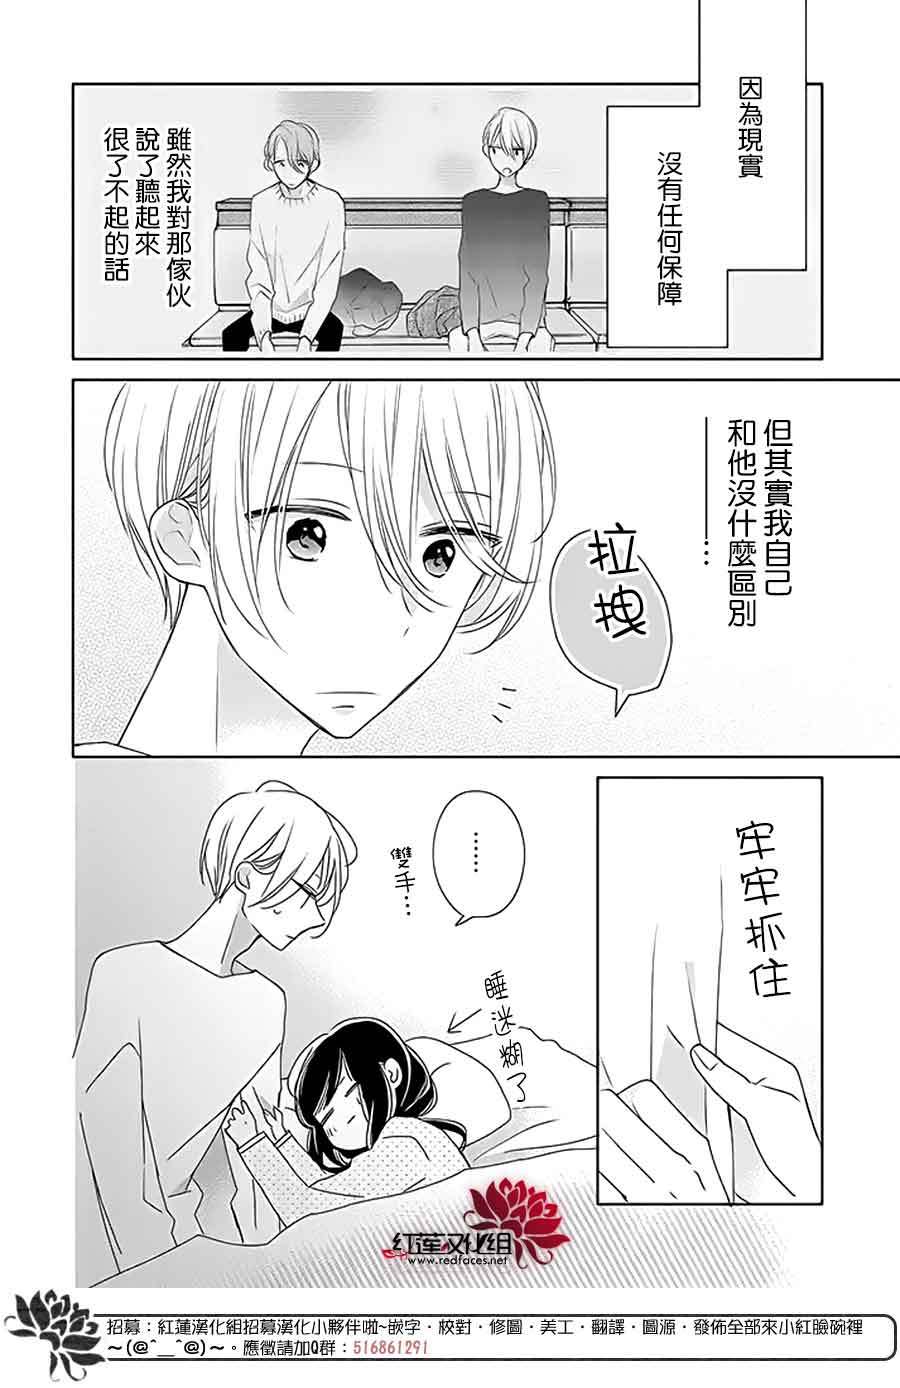 If given a second chance - 26話 - 6